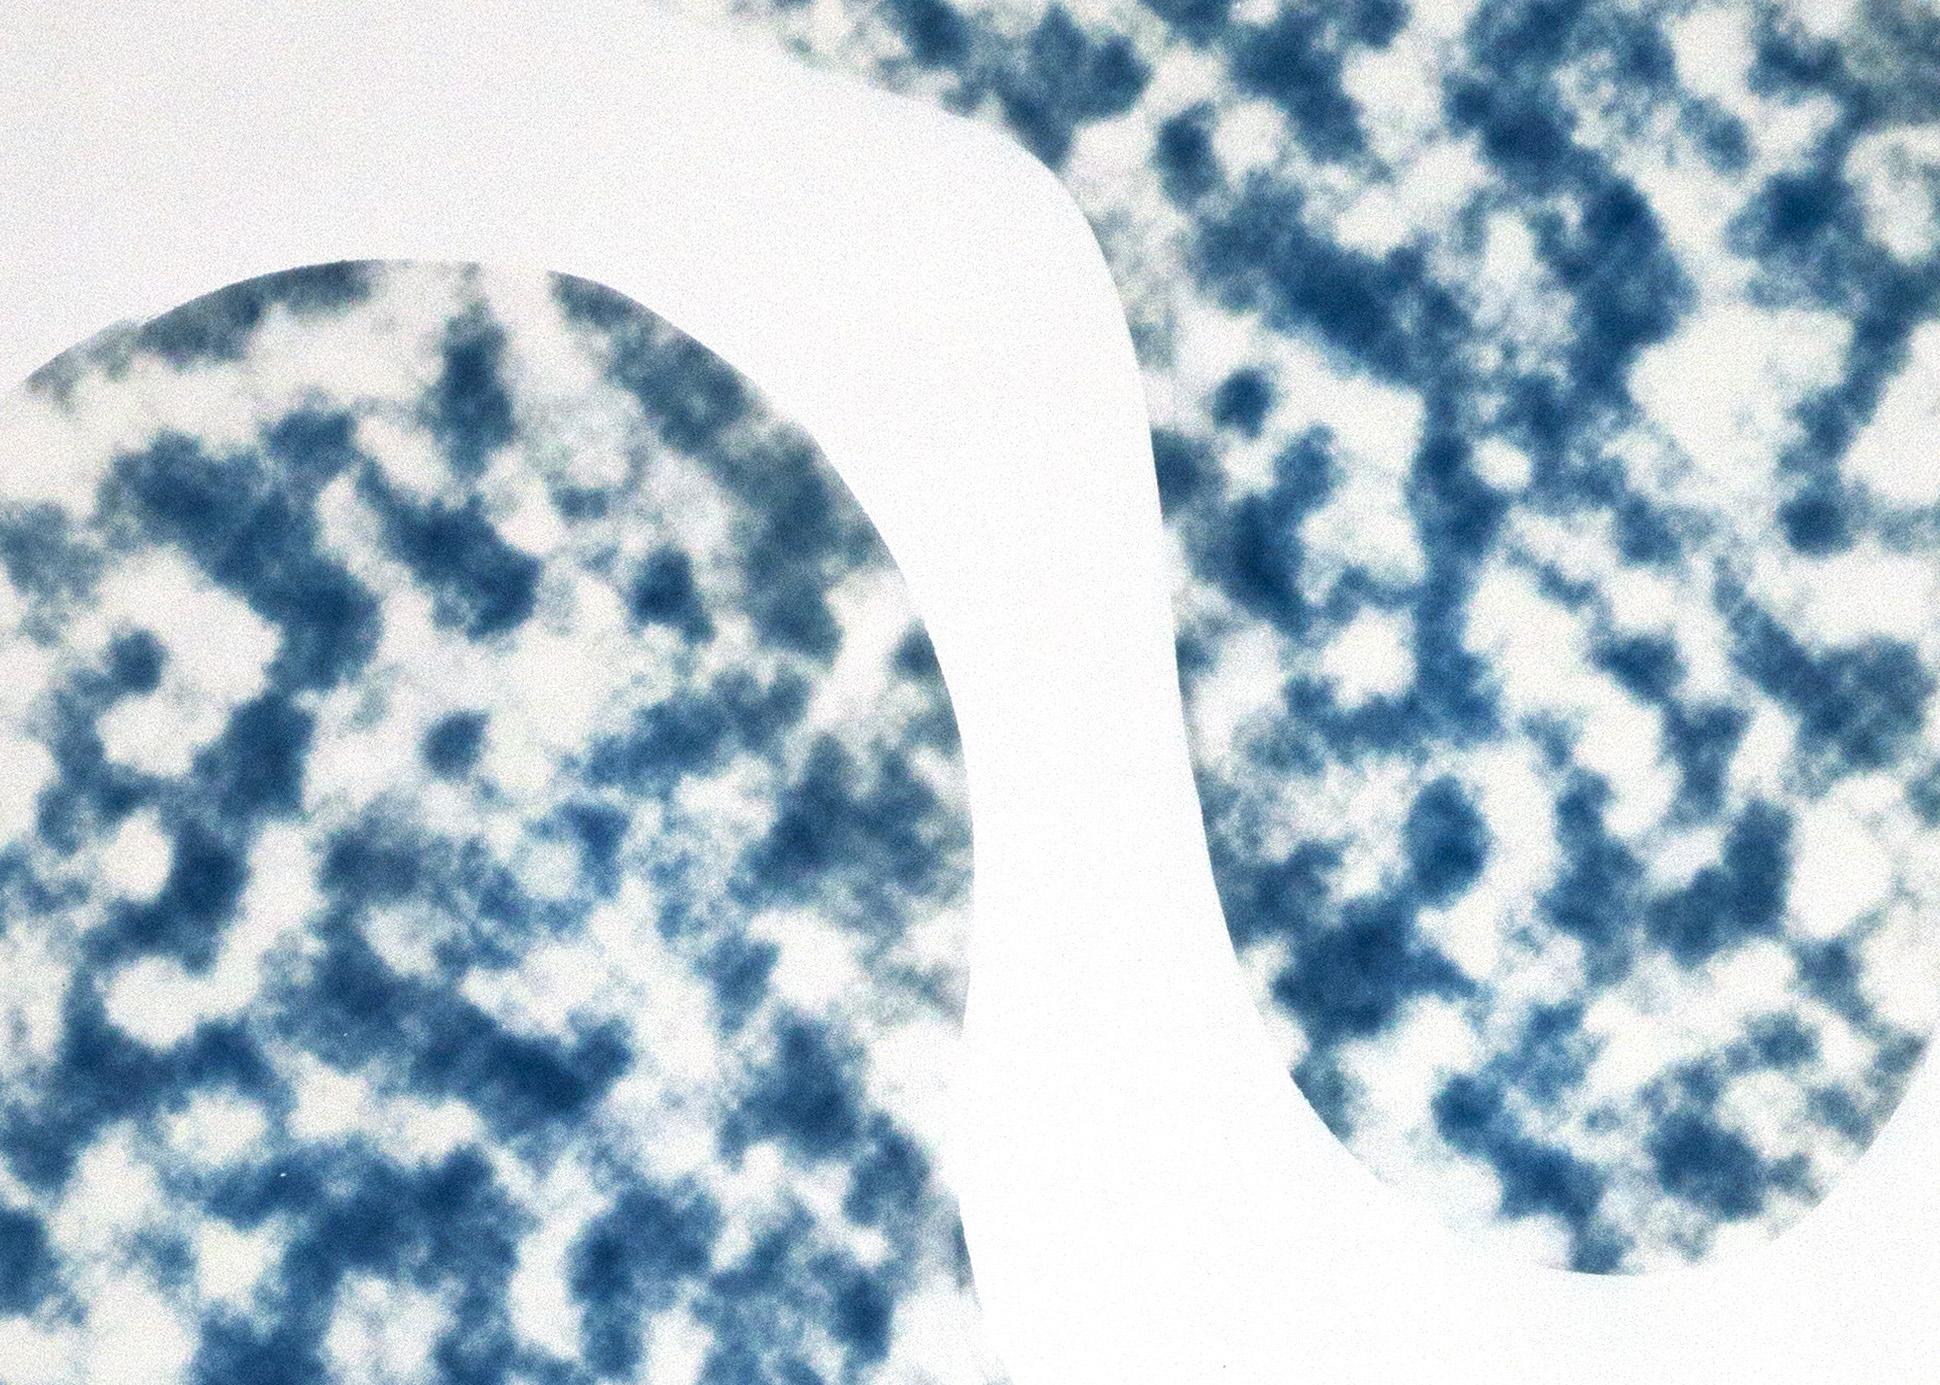 Kidney Bean Pools, Minimal Cyanotype Inspired by Architectural Pools, Cloudy  2